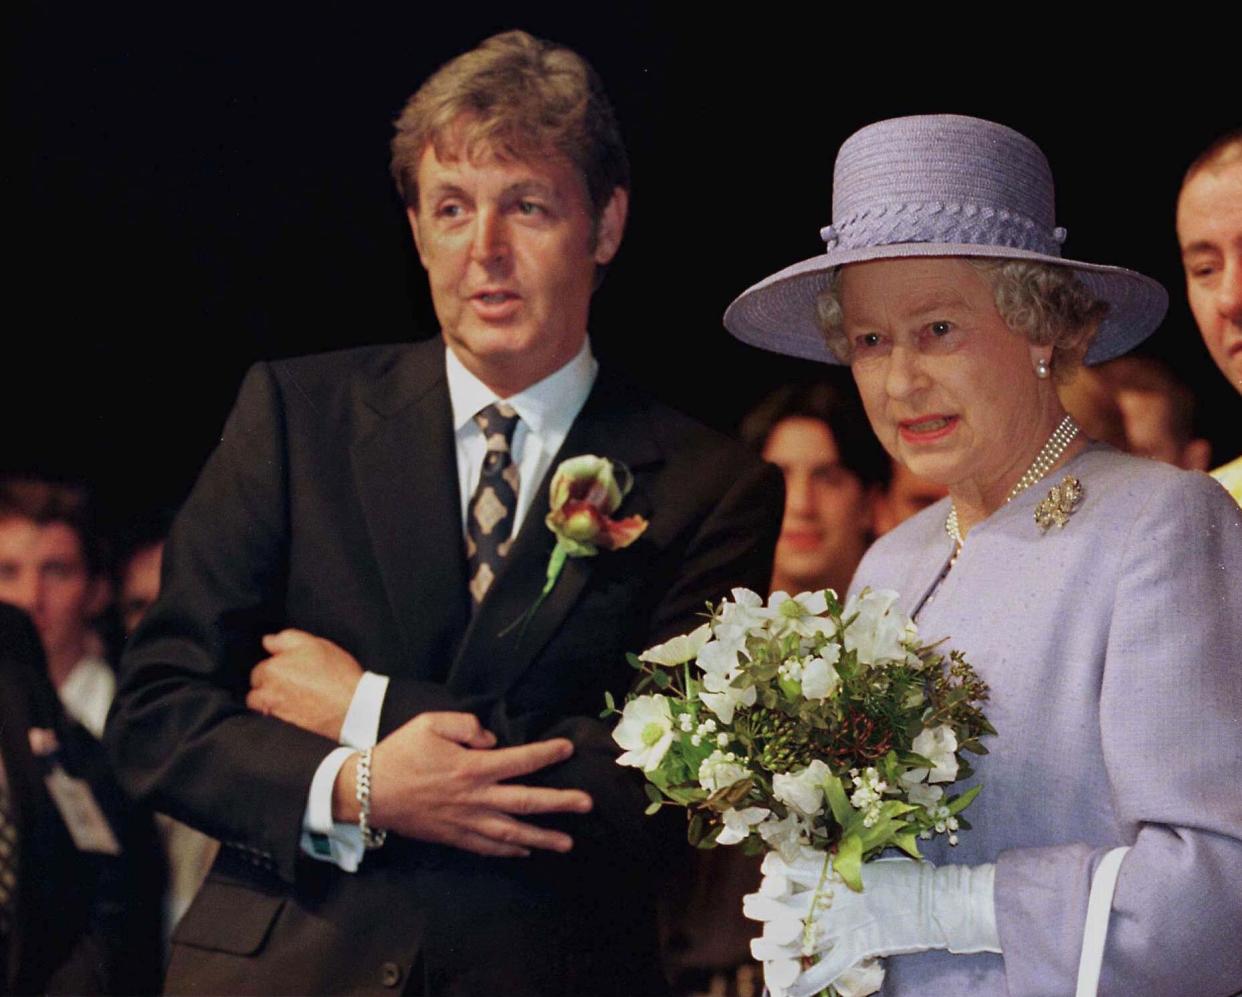 Mandatory Credit: Photo by Shutterstock (259225b) The Queen and Paul McCartney PAUL MCCARTNEY WITH QUEEN ELIZABETH II AT THE LIVERPOOL INSTITUTE FOR PERFORMING ARTS, BRITAIN - 1996